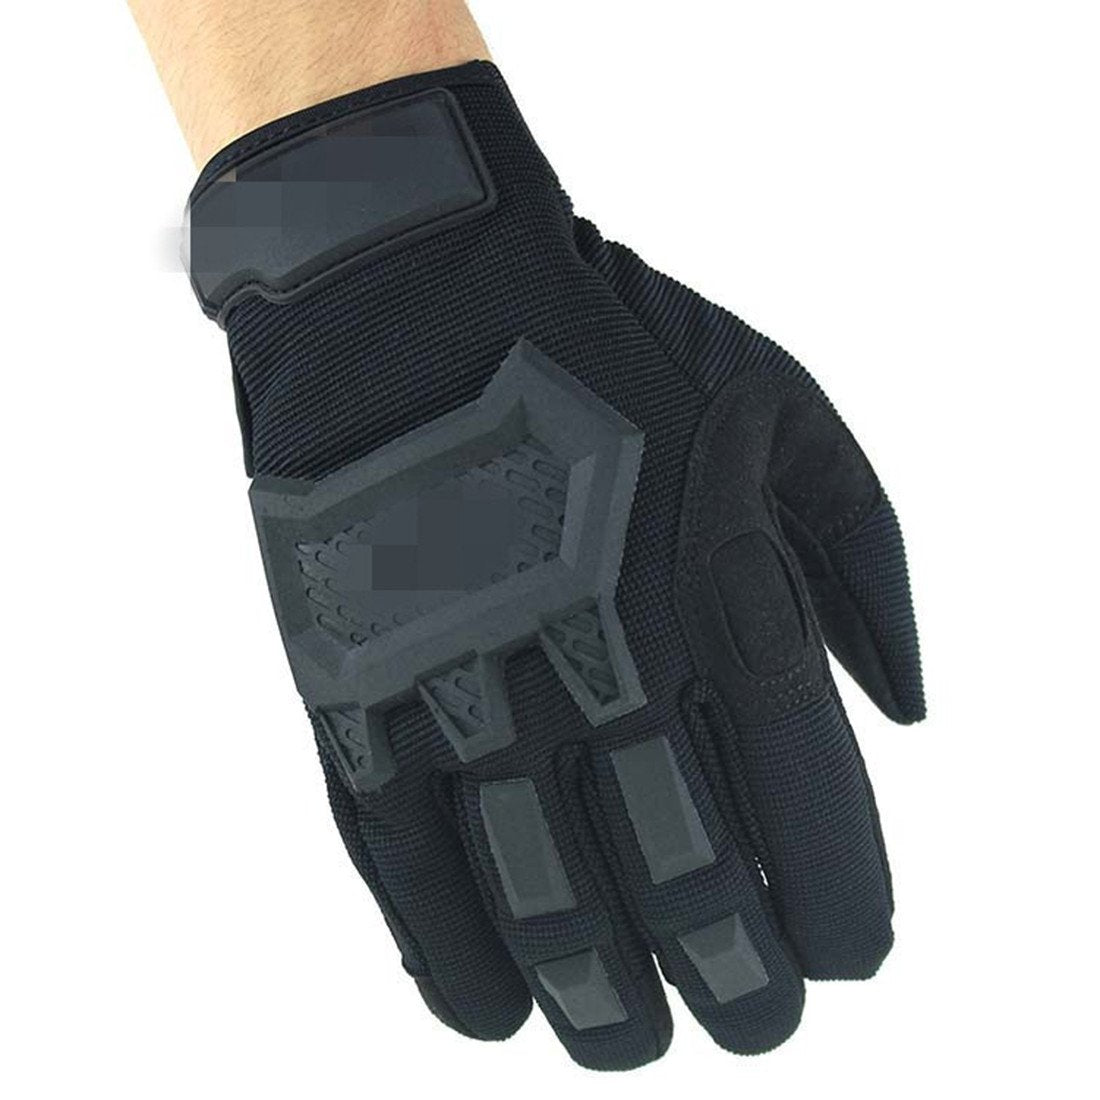 Full-fingered Breathable Anti-skid Protective Gloves - AH Tactical 